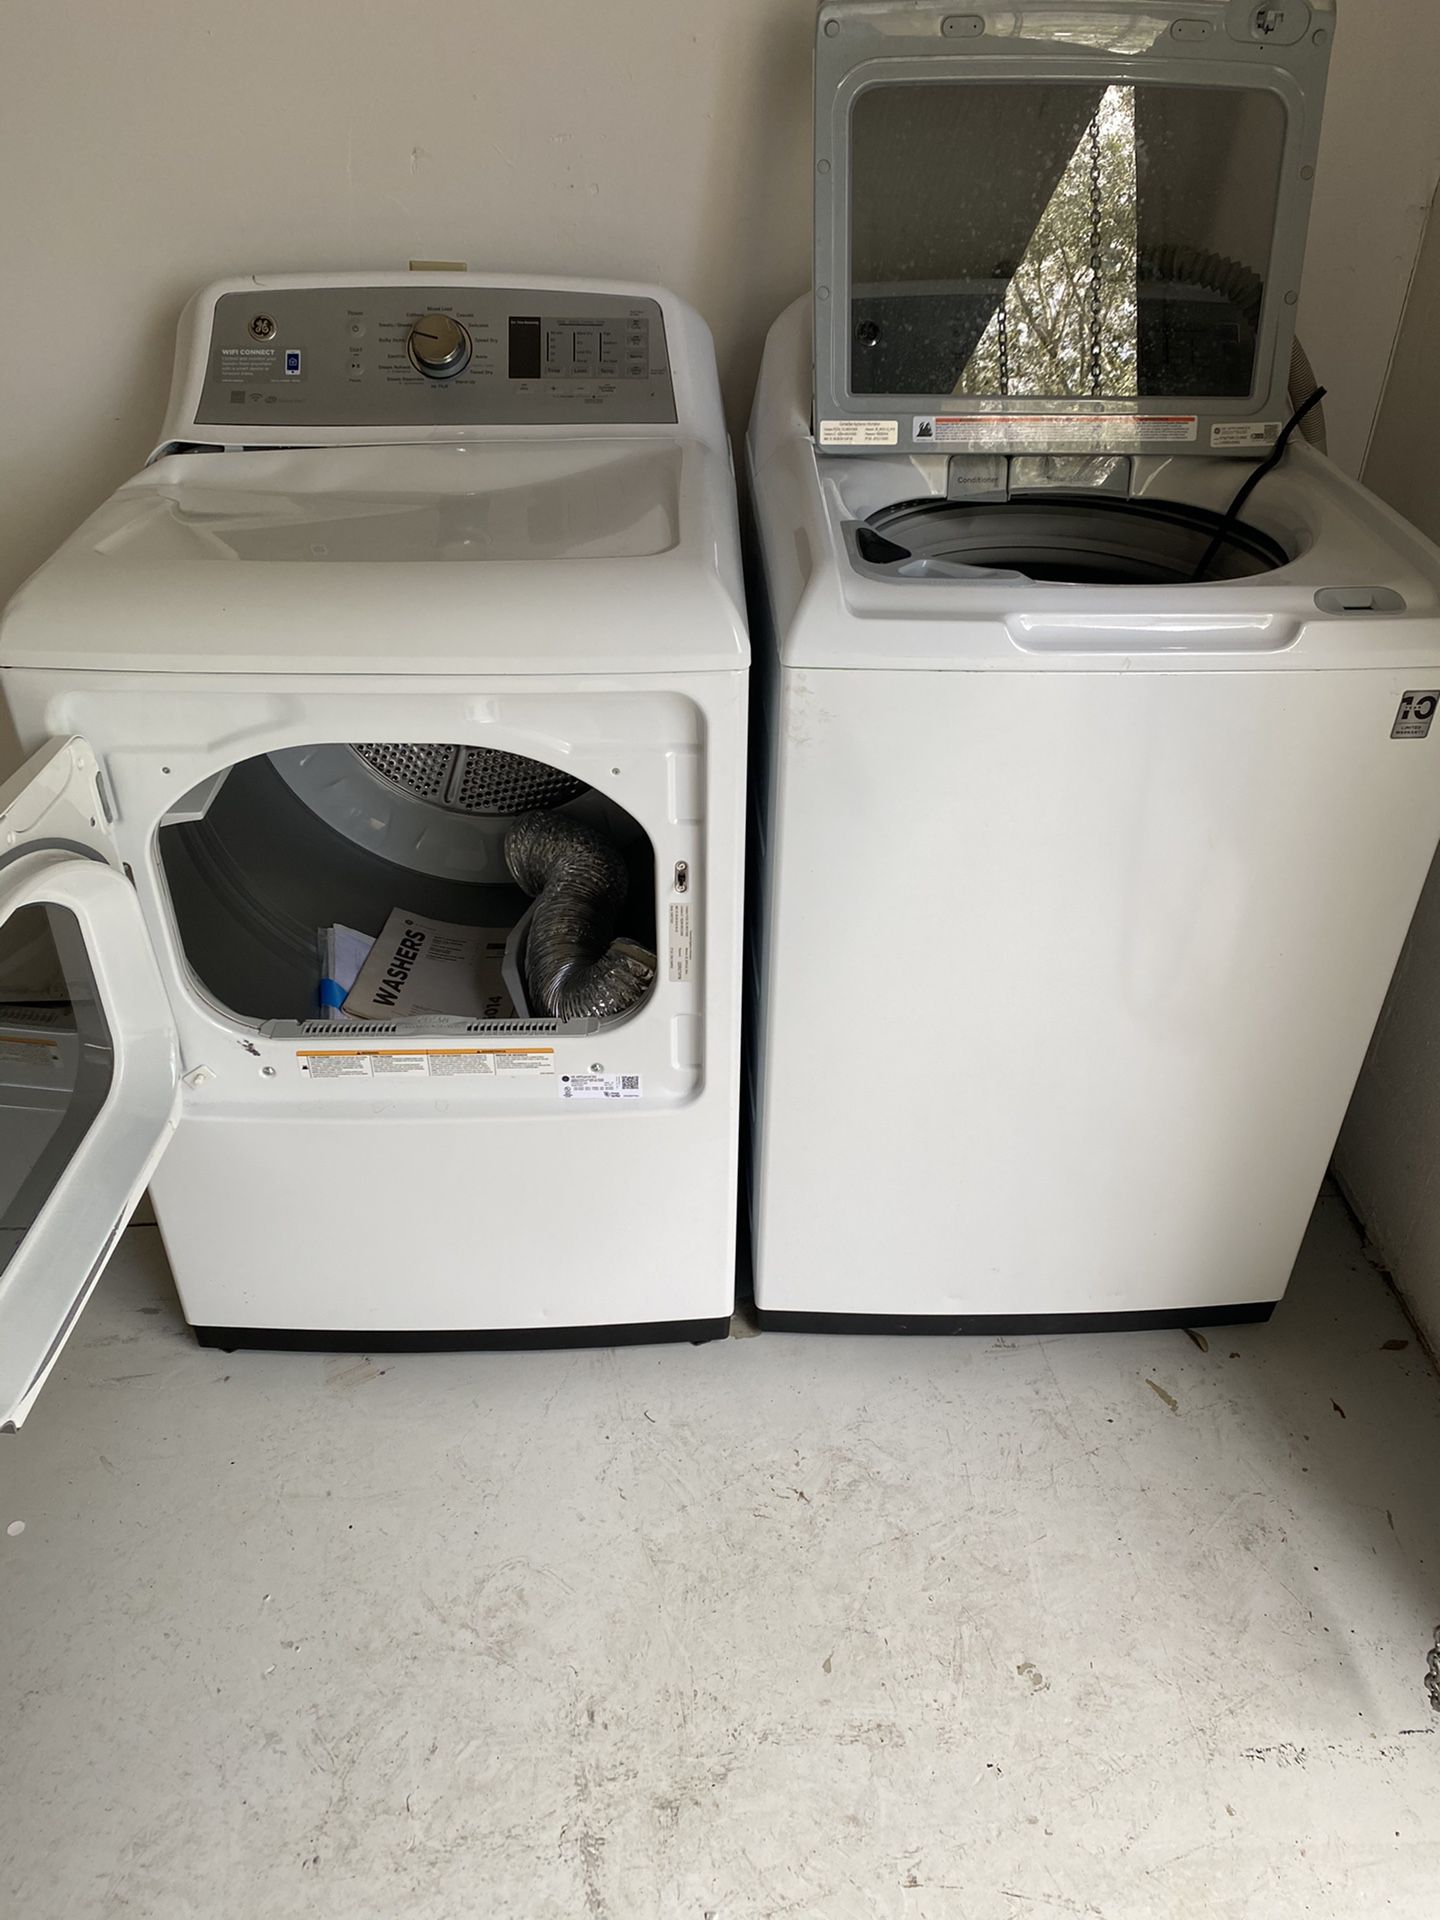 G. E. Washer and Dryer set